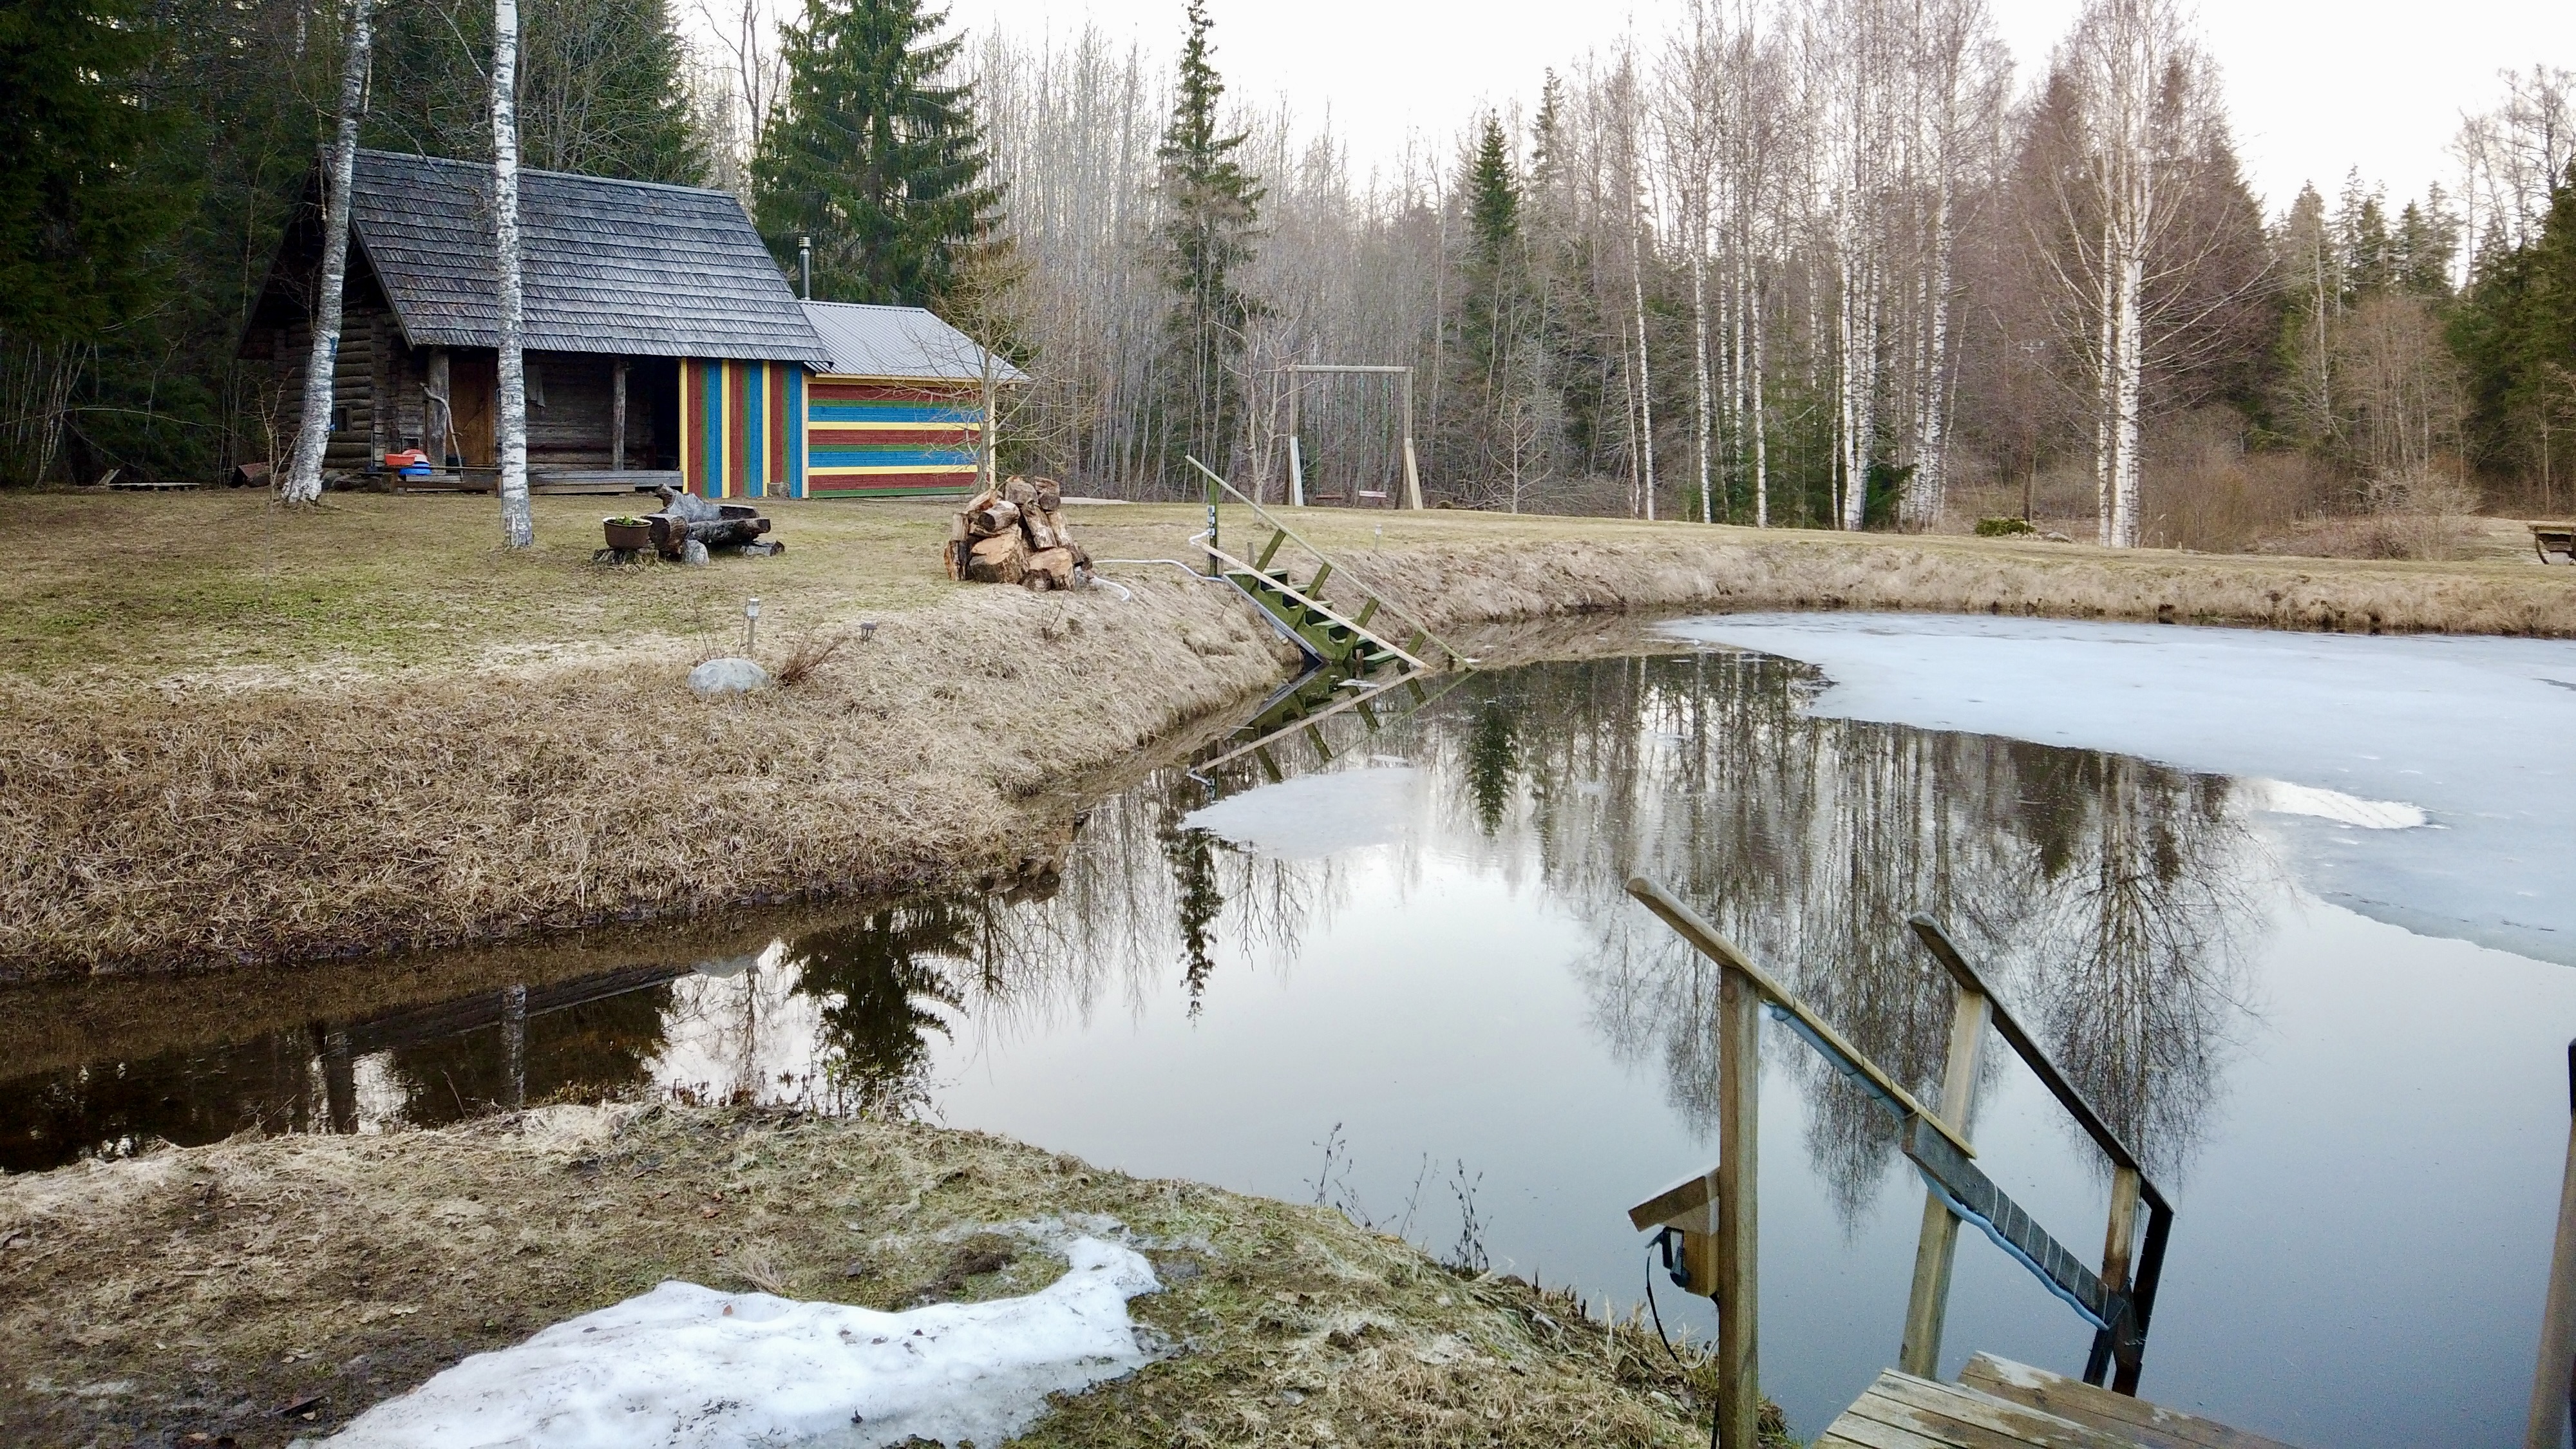 Mooska smoke sauna during the early spring with frozen pond